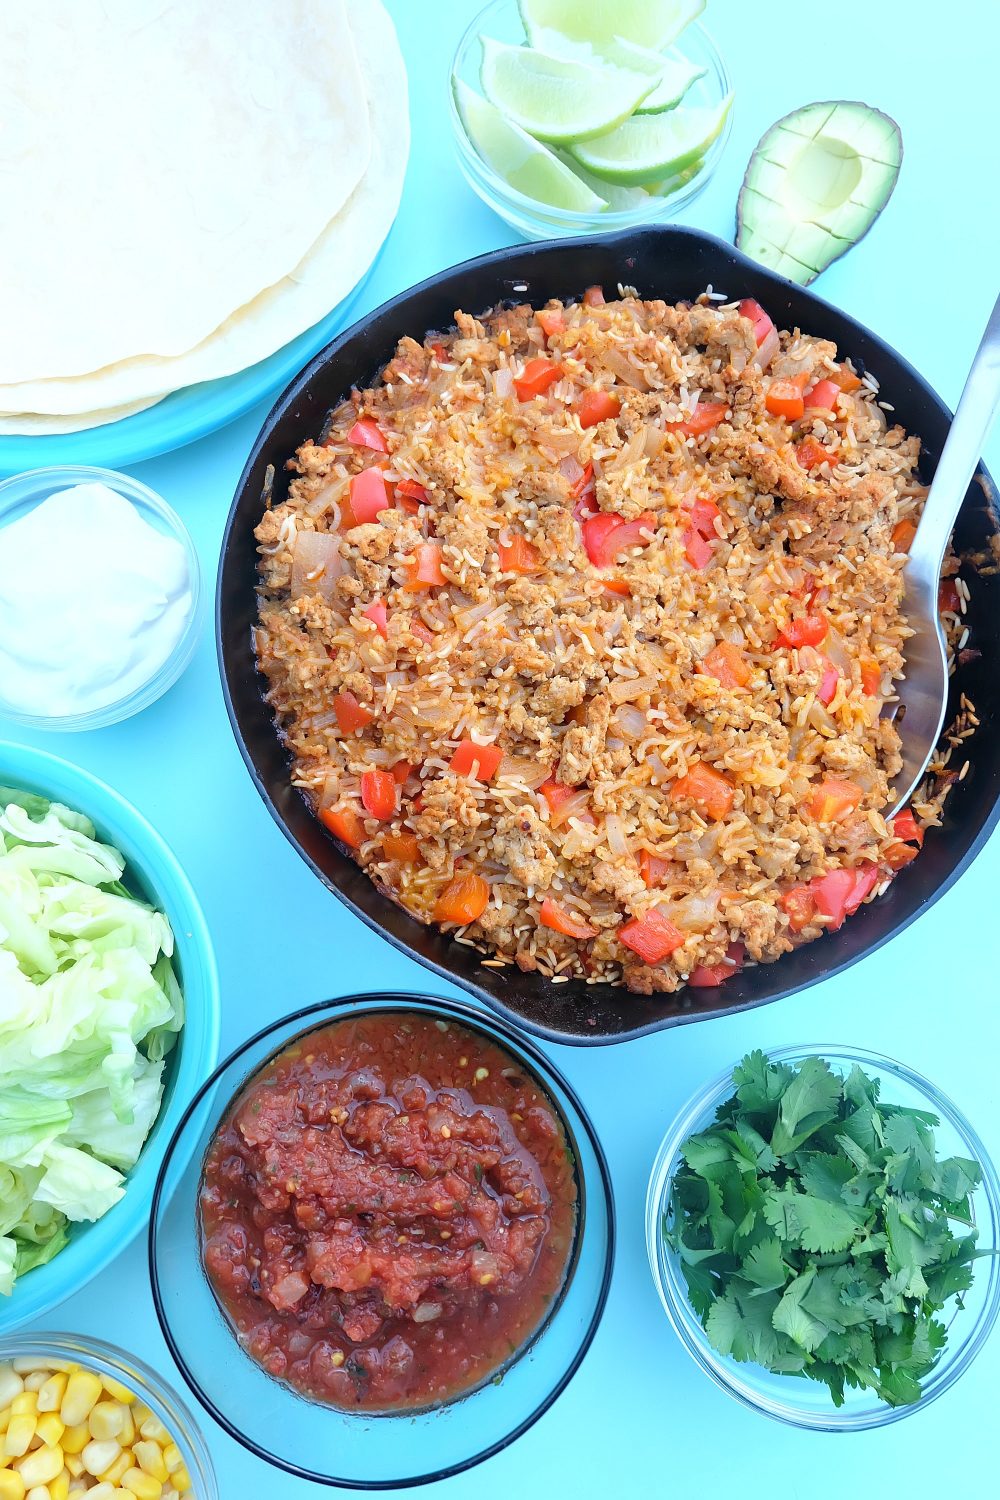 Looking for a quick and easy, one pan healthy dinner idea that will feed a crowd? This ground turkey and rice Mexican casserole recipe only takes 10 minutes to prep, then you pop it in the oven. Perfect for filling tacos, burritos or using as a topping for taco salad! A healthy, delicious and family friendly meal idea! #MakeItWithTurkey #Recipe #Mexican #Turkey #OnePan